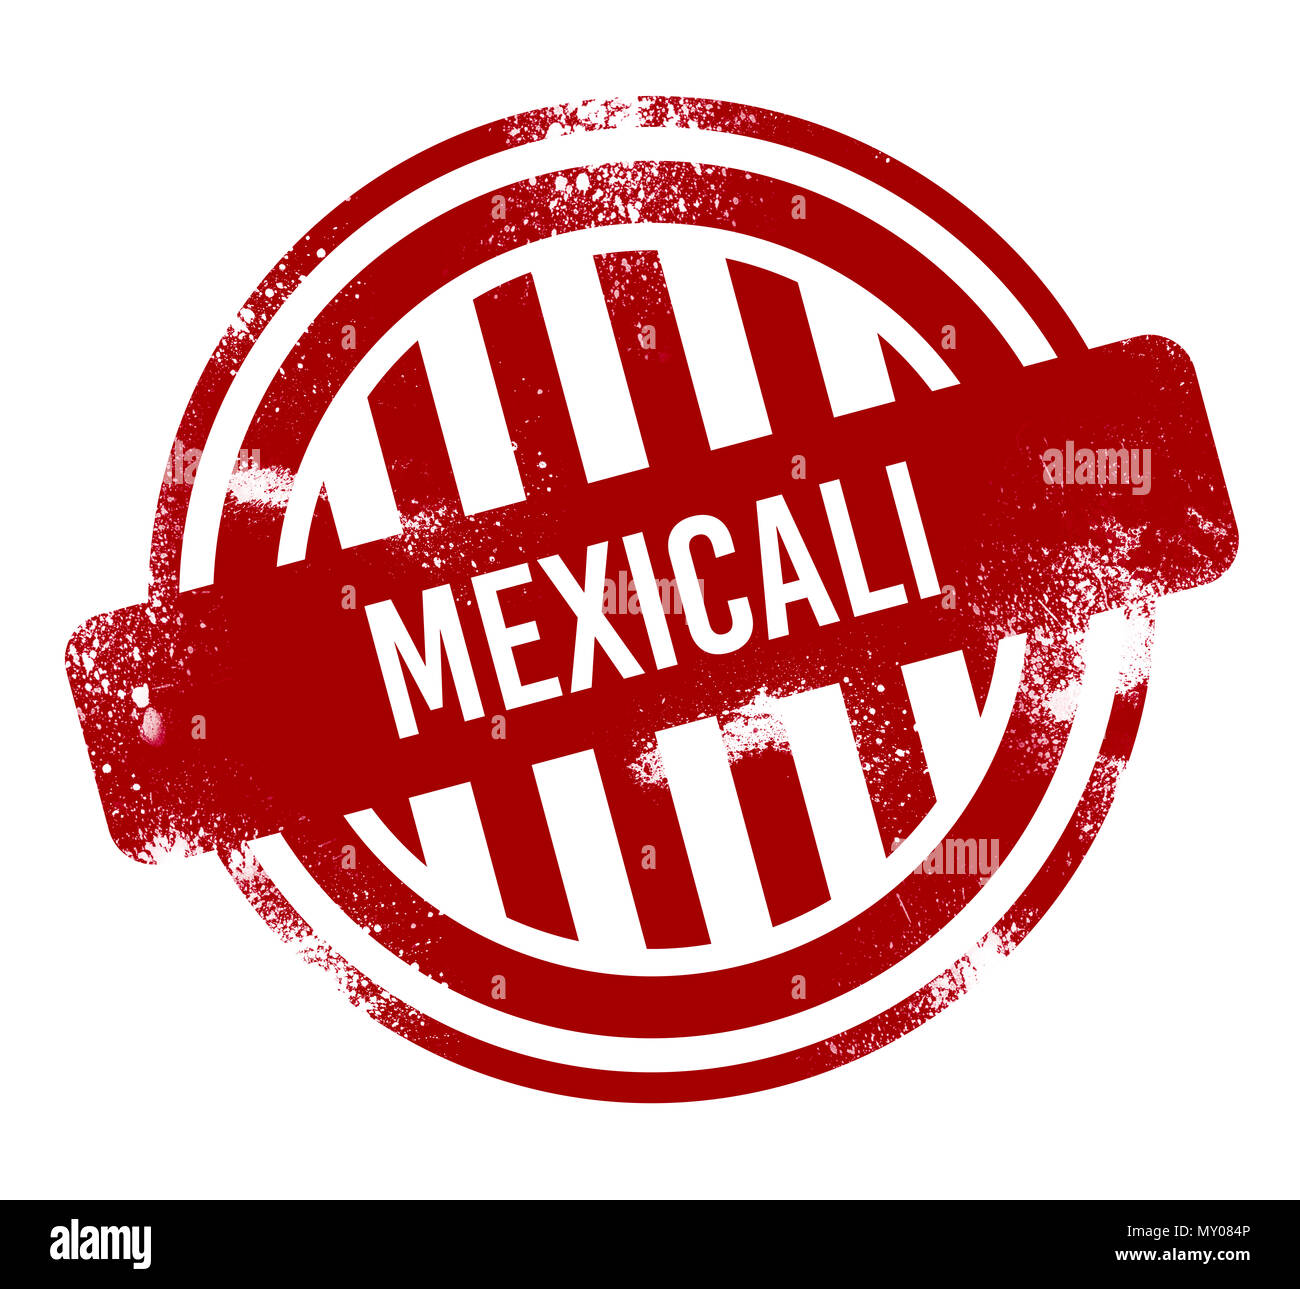 Mexicali - Red grunge button, stamp Stock Photo